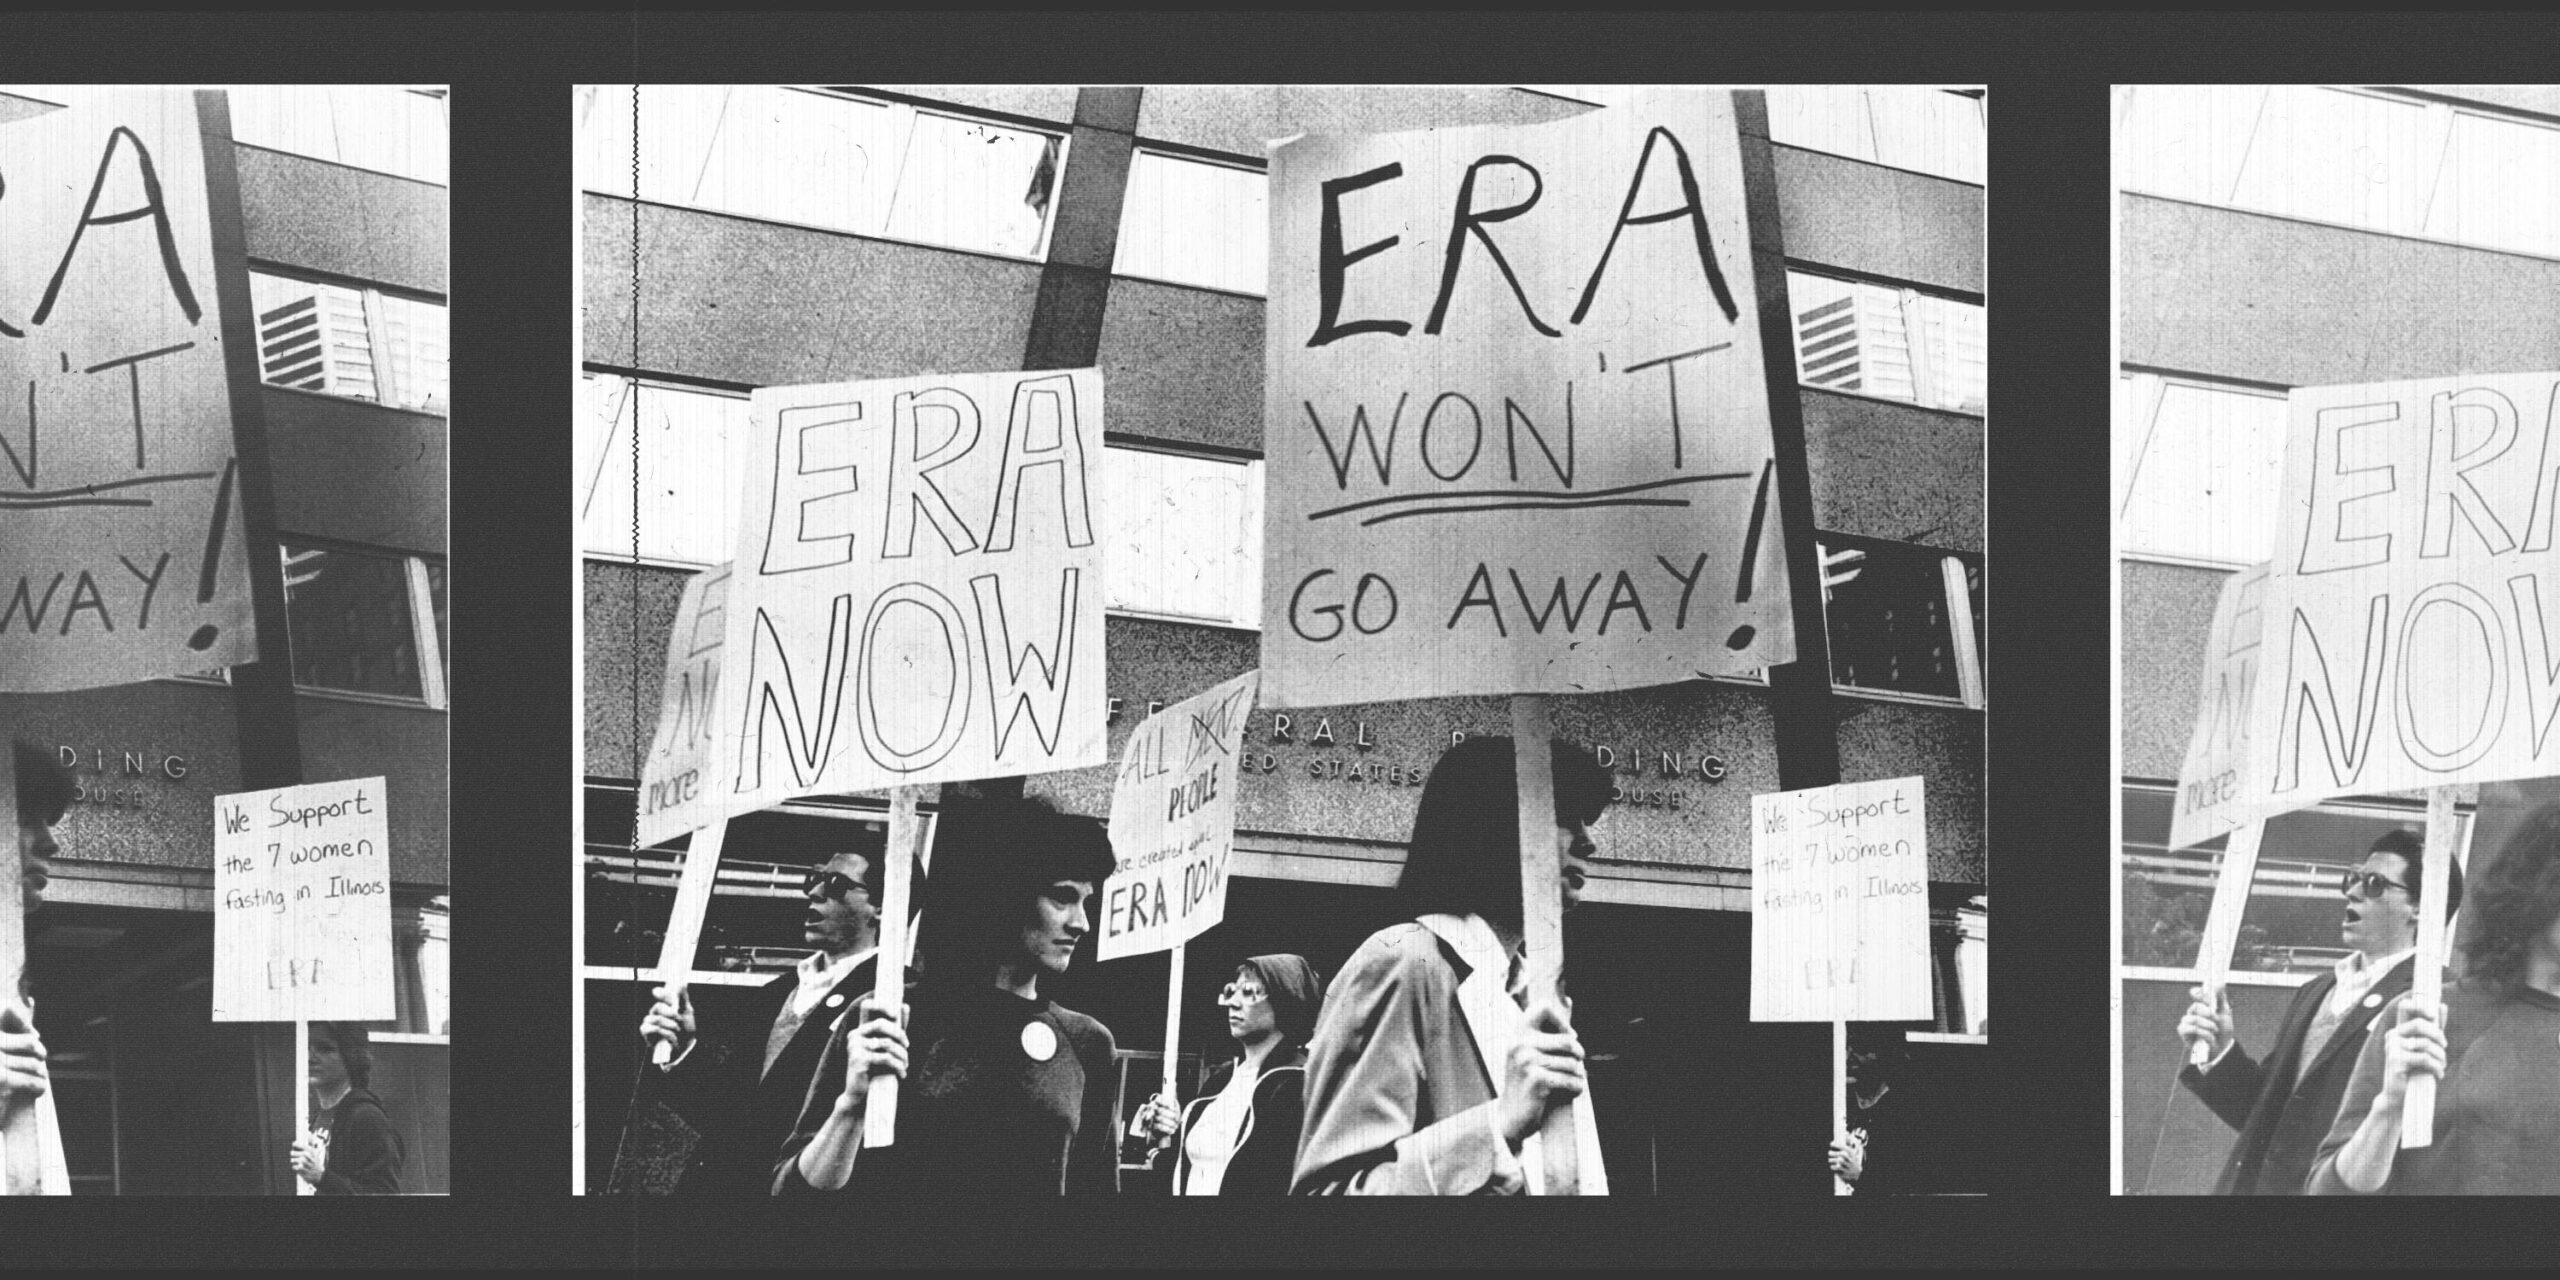 A black and white vintage photo of people protesting. In the foreground, a woman holds a sign that says "ERA WON'T GO AWAY!" and another holds a sign that says "ERA NOW." They are in front of an office building.